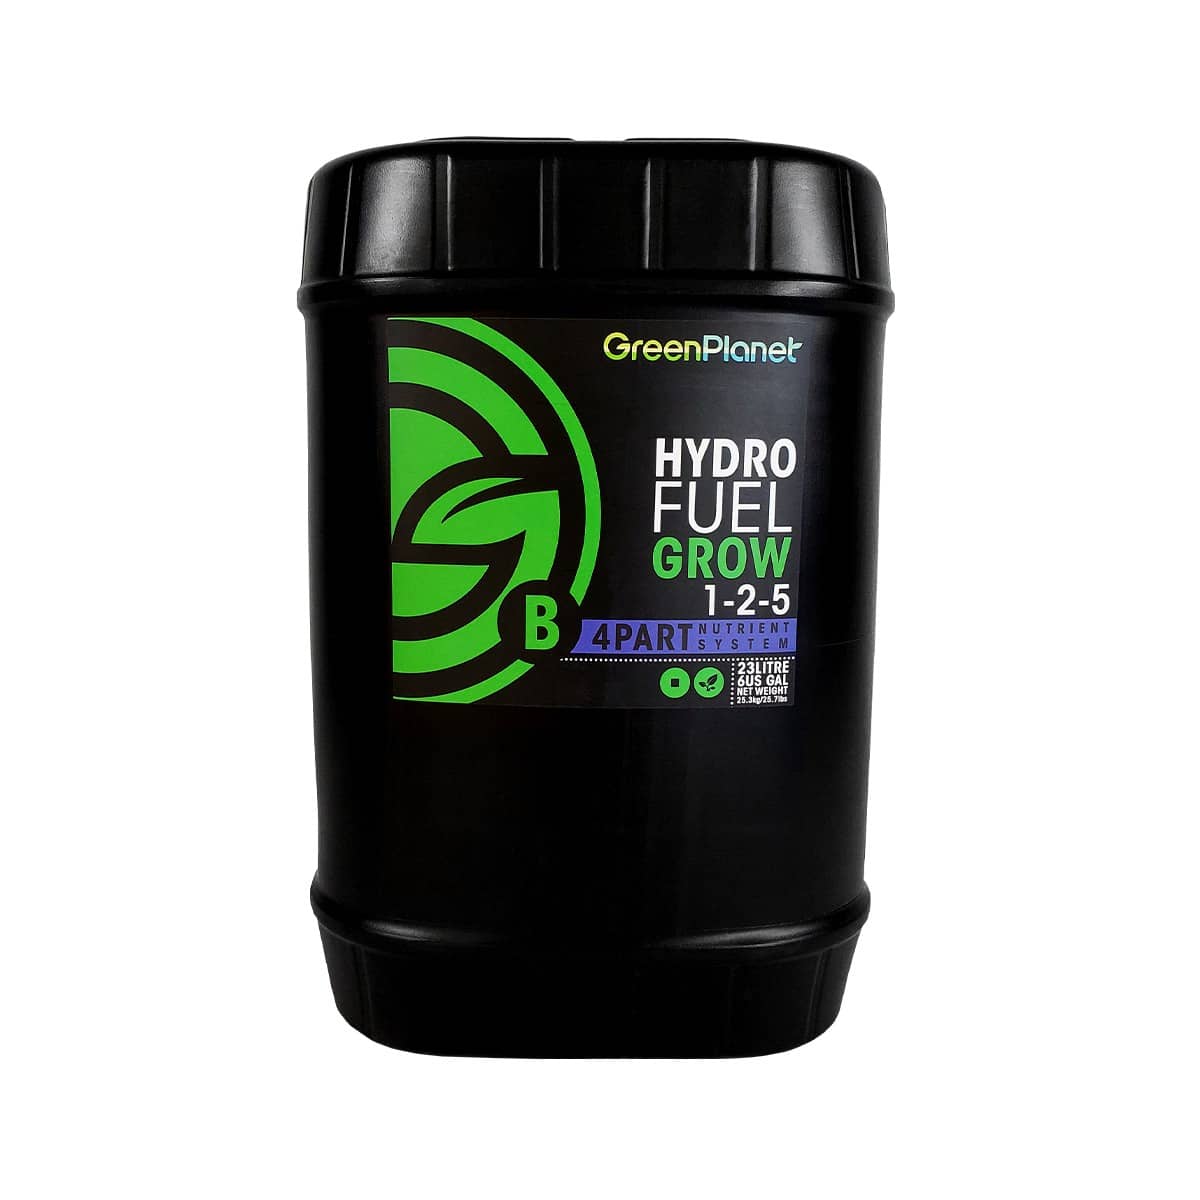 Product Image:GreenPlanet Hydro Fuel Grow Nutrients B (1-2-5)